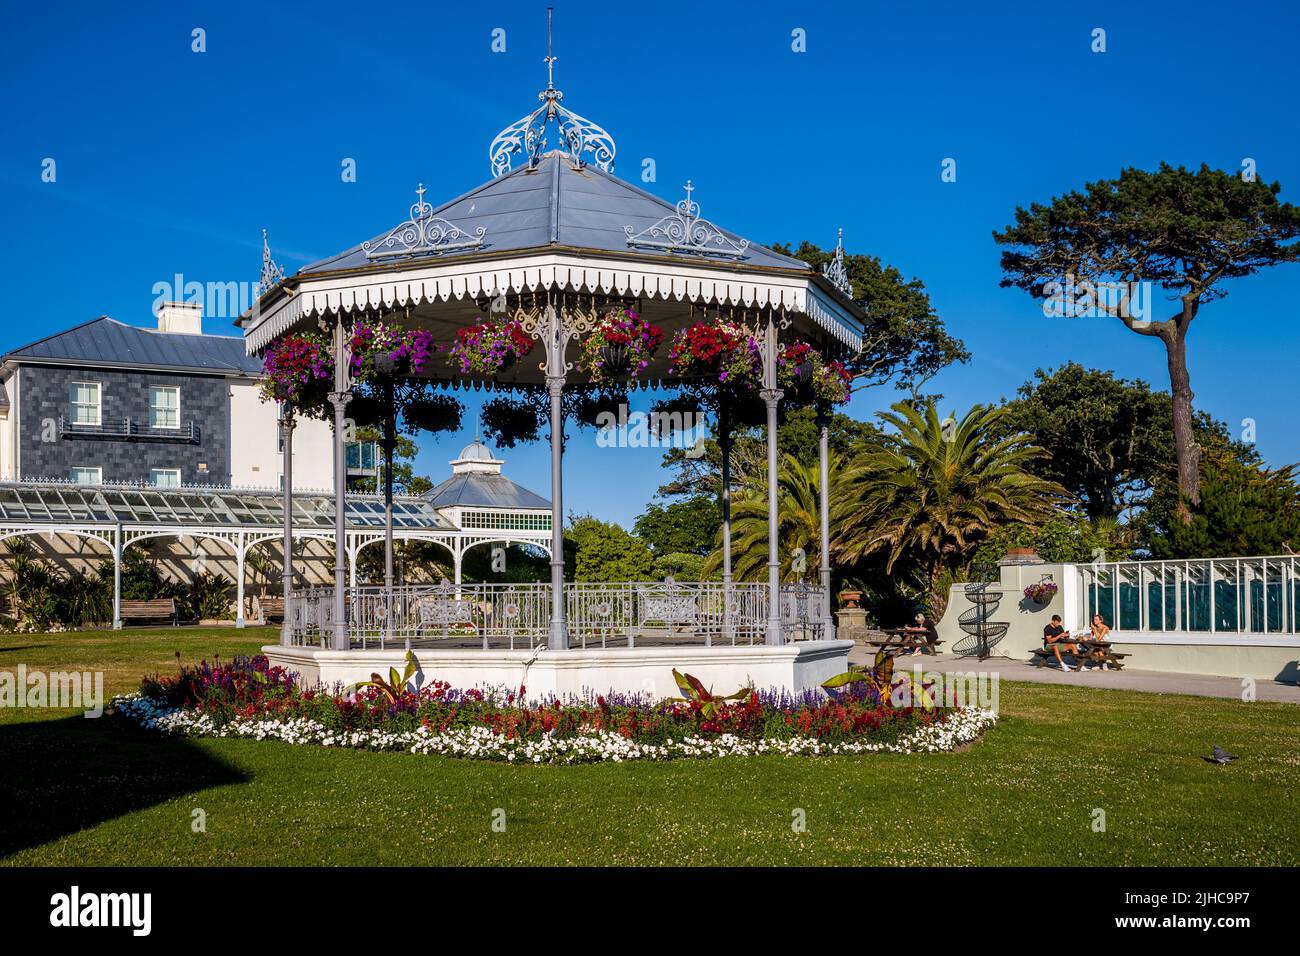 Gyllyngdune Gardens Falmouth Cornwall UK. Located adjacent to the Princess Pavilion in Falmouth the newly restored gardens overlook the sea. Open 1907. Stock Photo